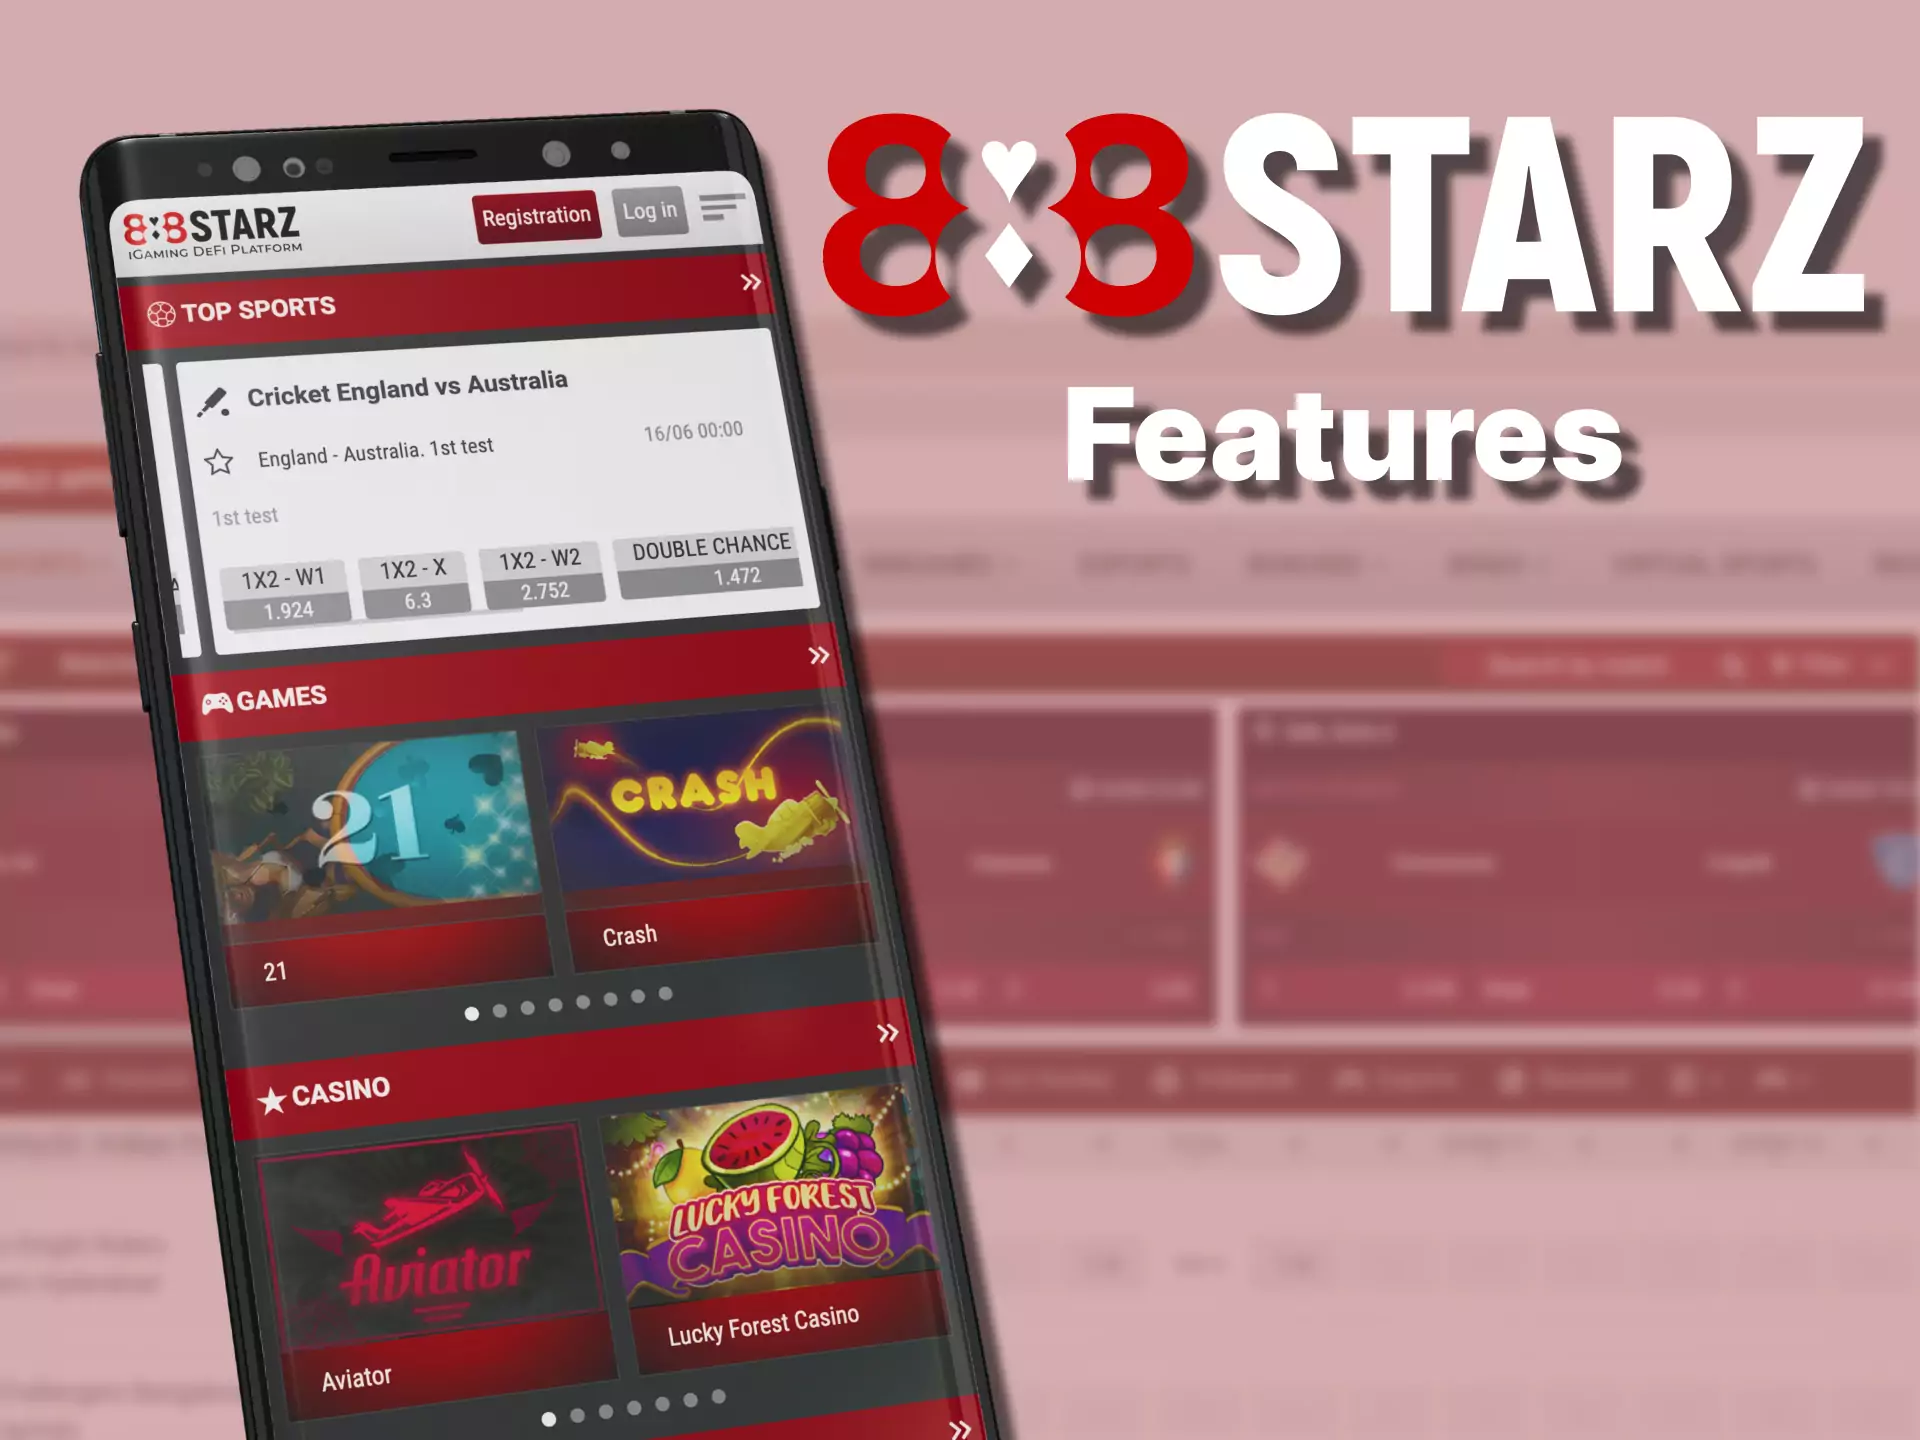 The 888starz app offers many handy features for betting and gaming.